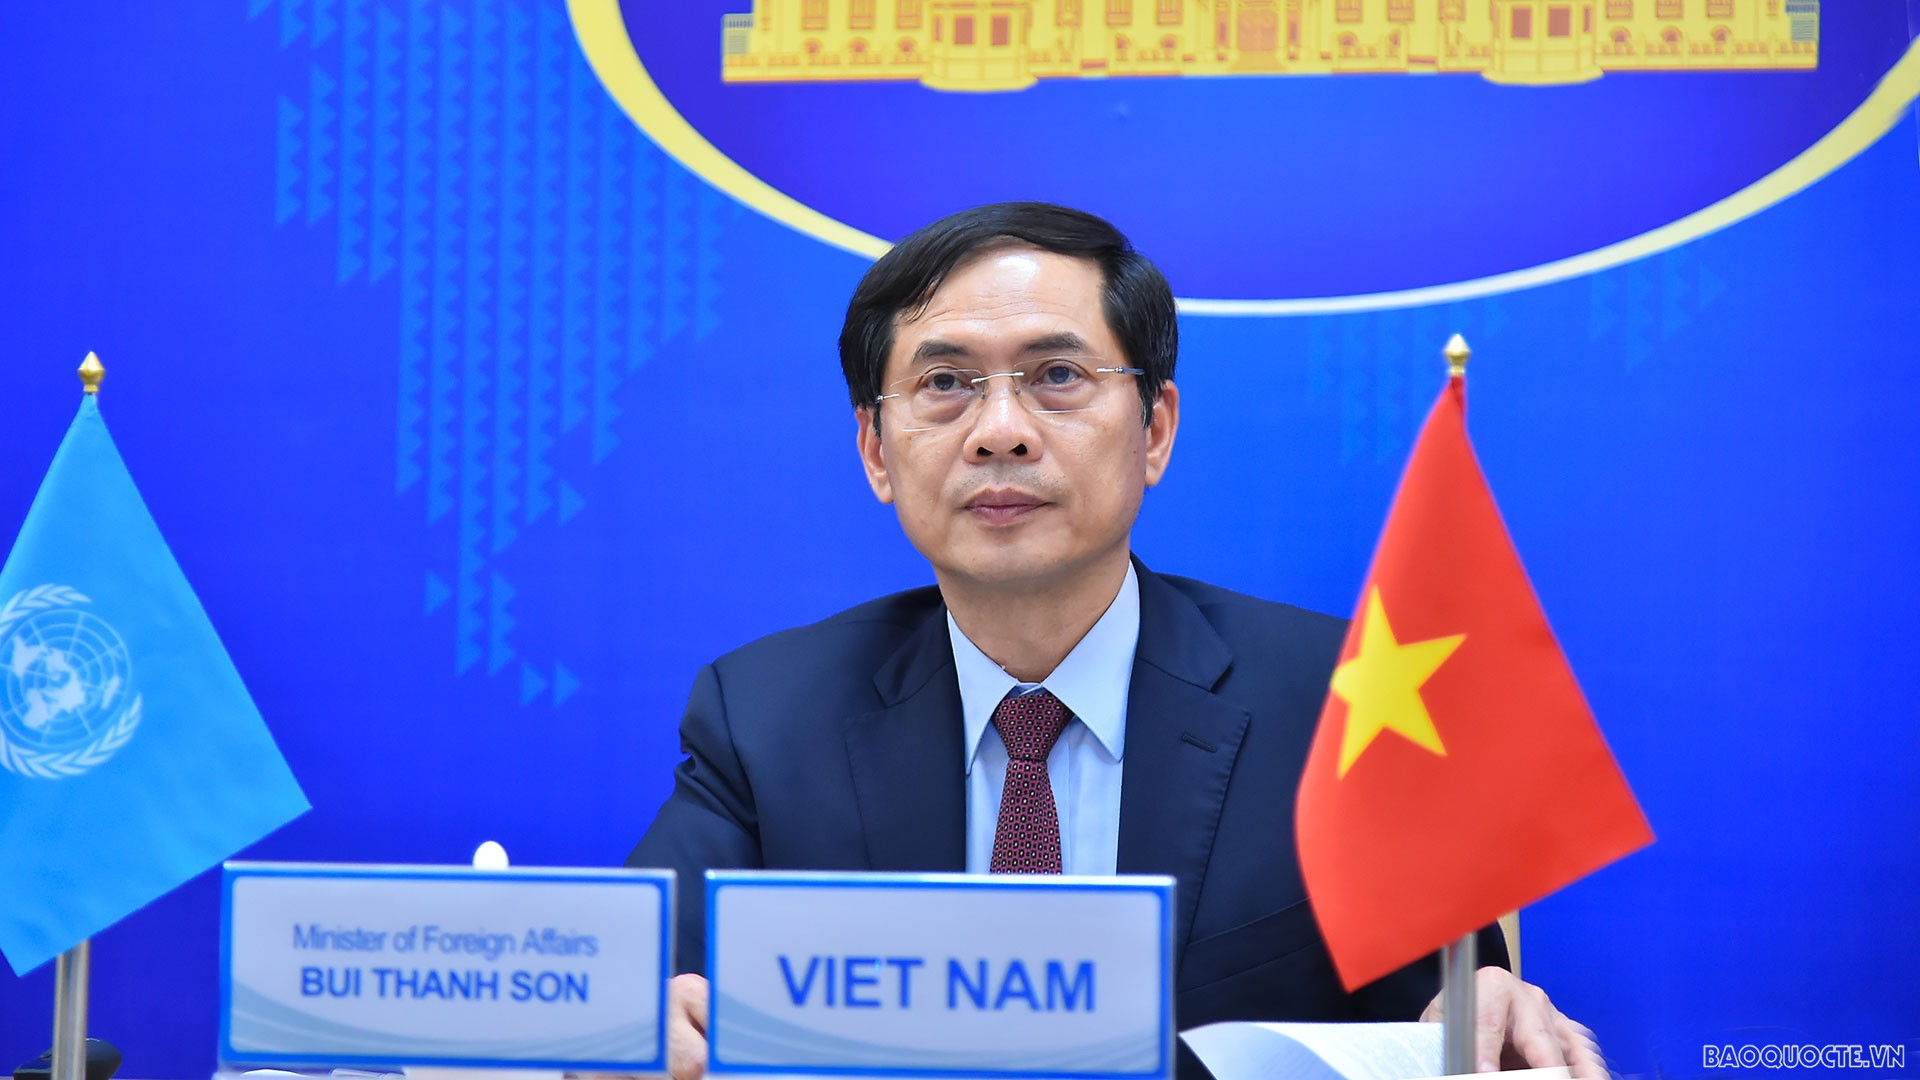 Foreign Minister Bui Thanh Son: Cyber security crucial for peace, prosperity